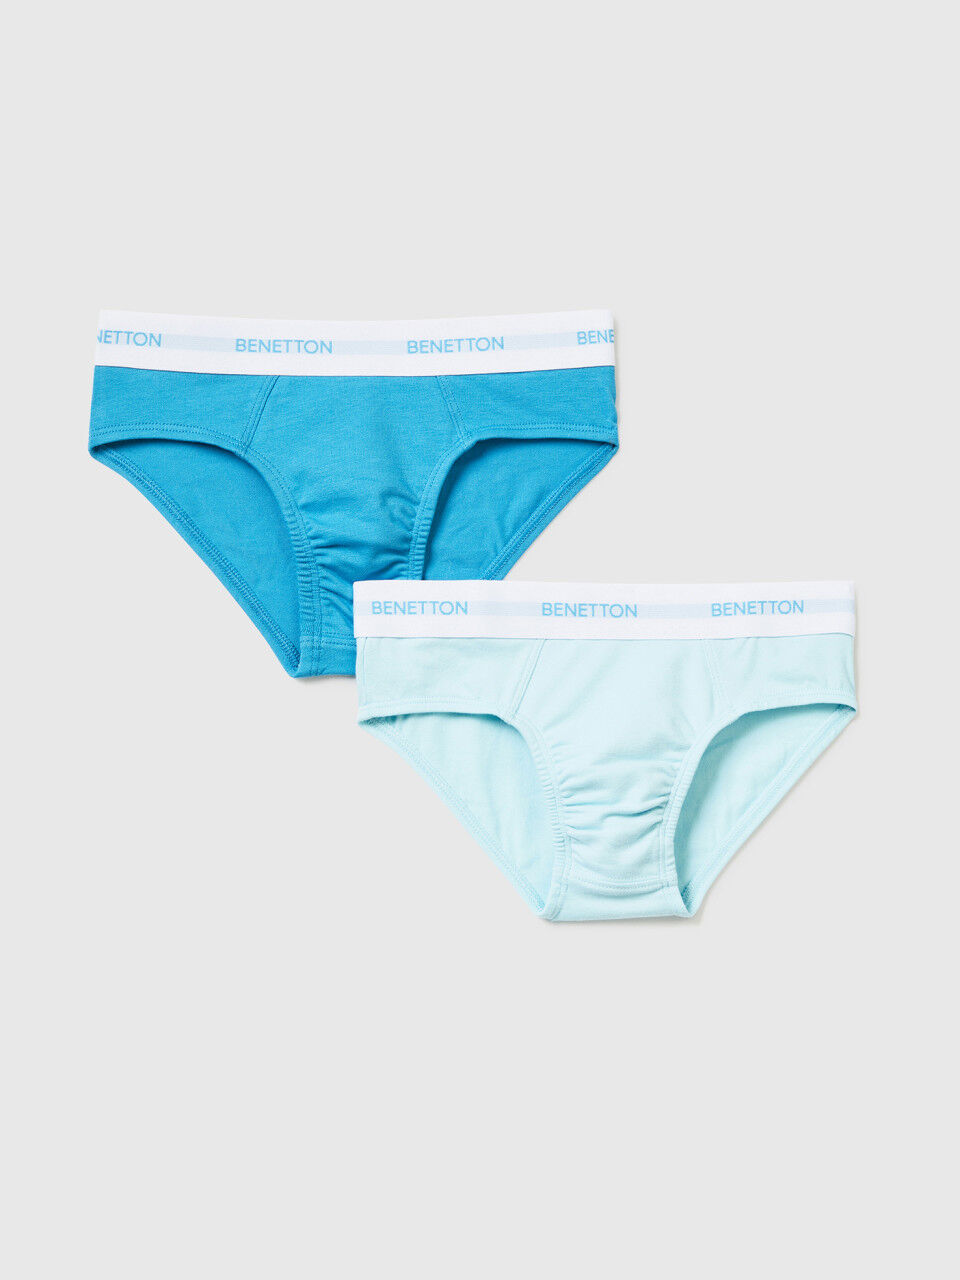 Two pairs of briefs with logoed elastic